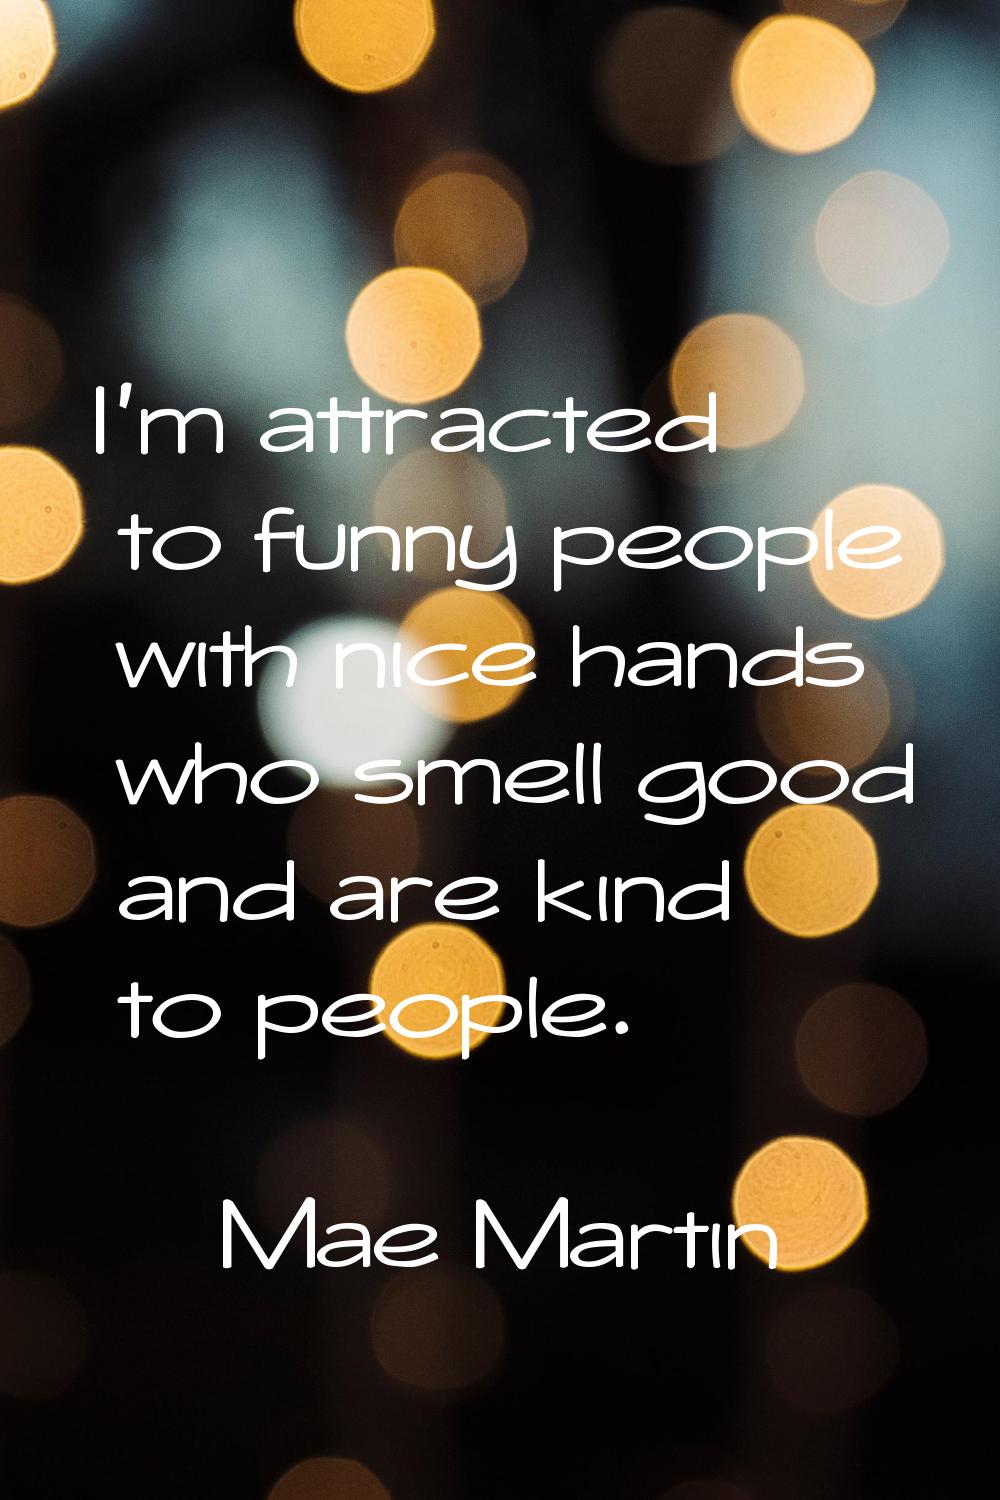 I'm attracted to funny people with nice hands who smell good and are kind to people.